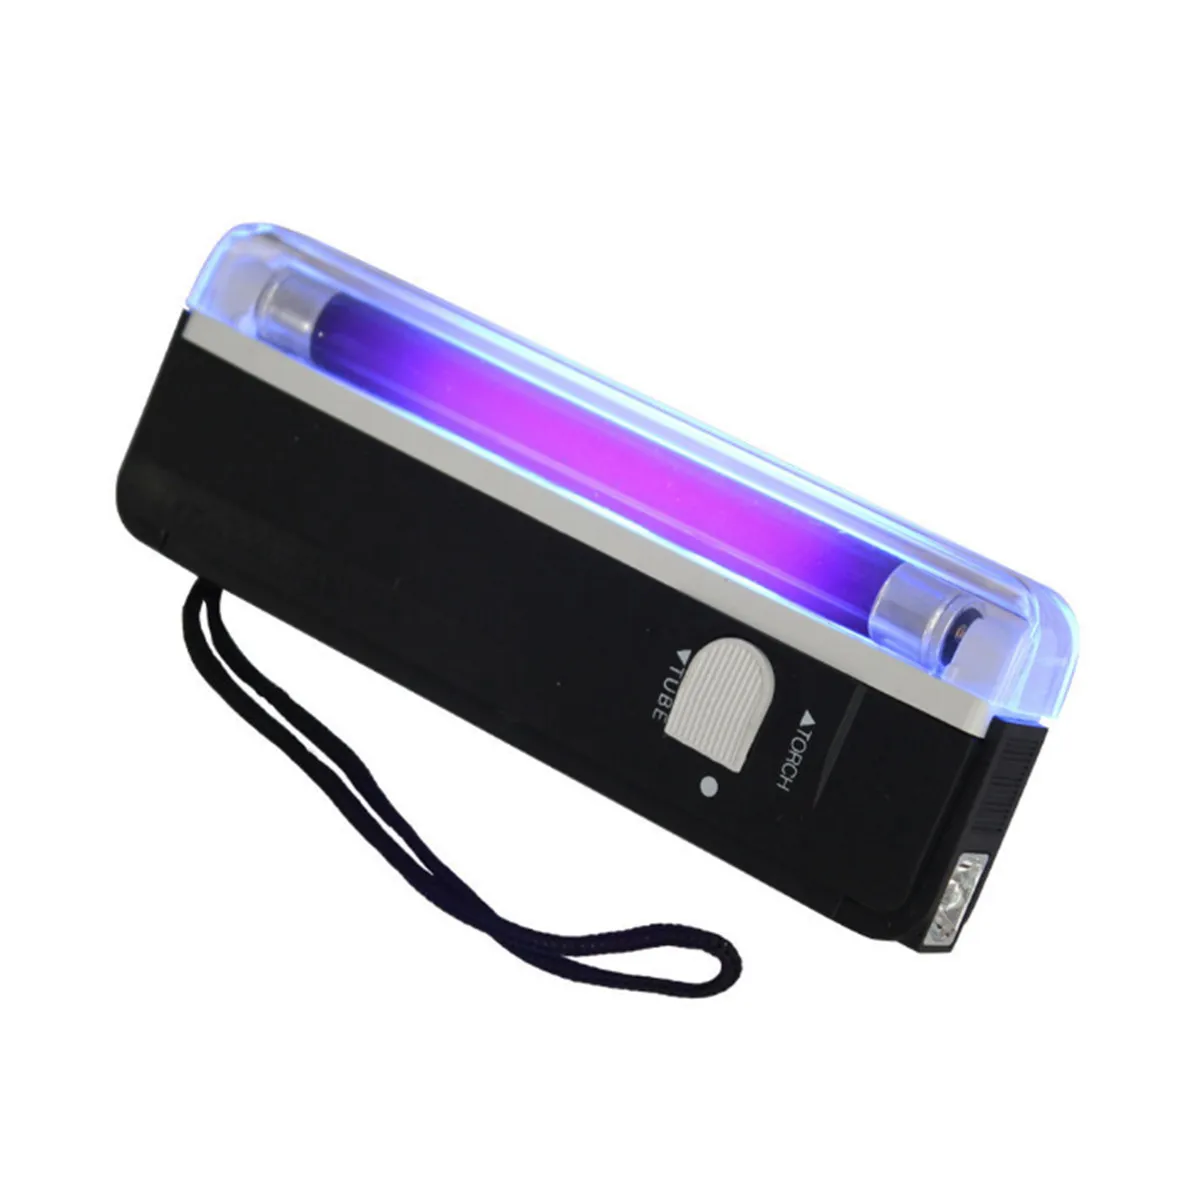 Fake Counterfeit Currency Detector 2 in 1 Handheld Portable UV Black Light Torch Portable Fake Money Cash Detector Money Tester